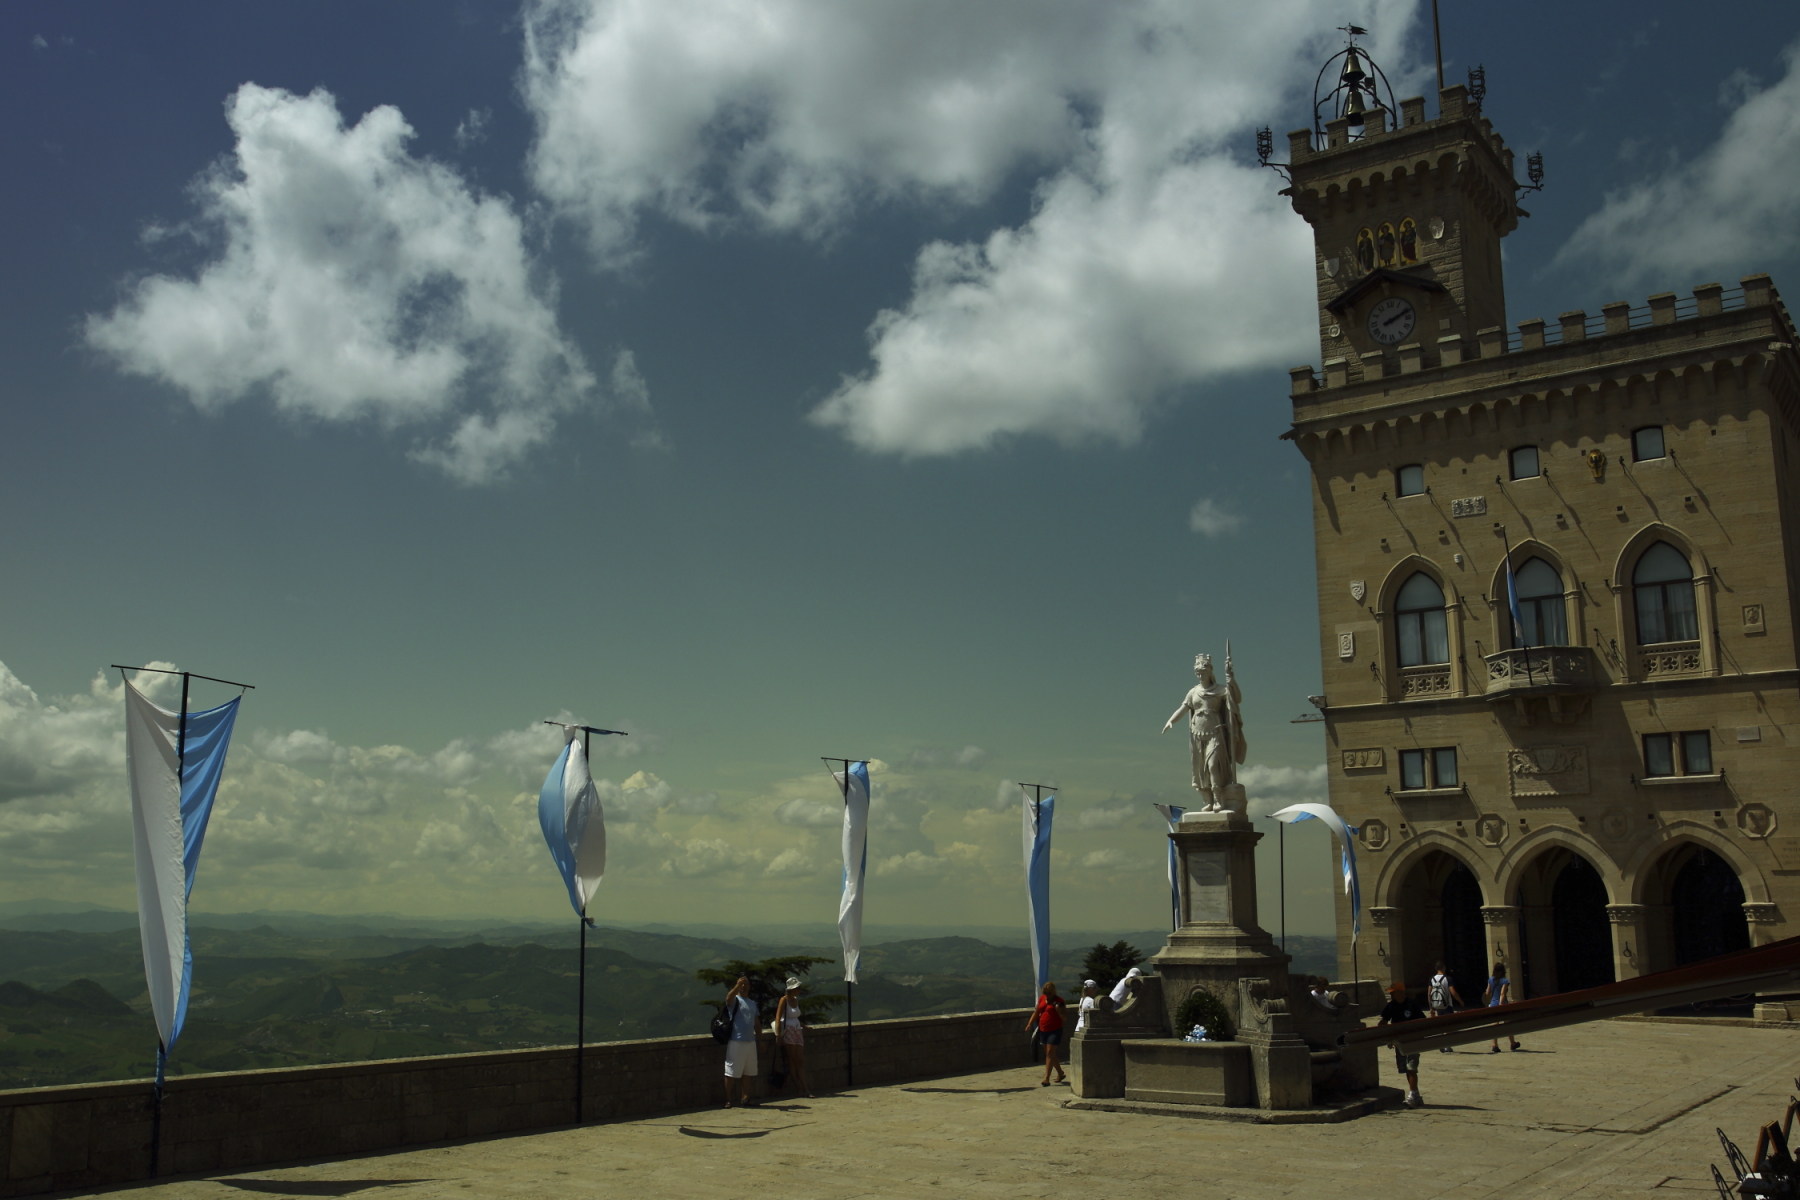 San Marino, Republic of. In the middle of Italy